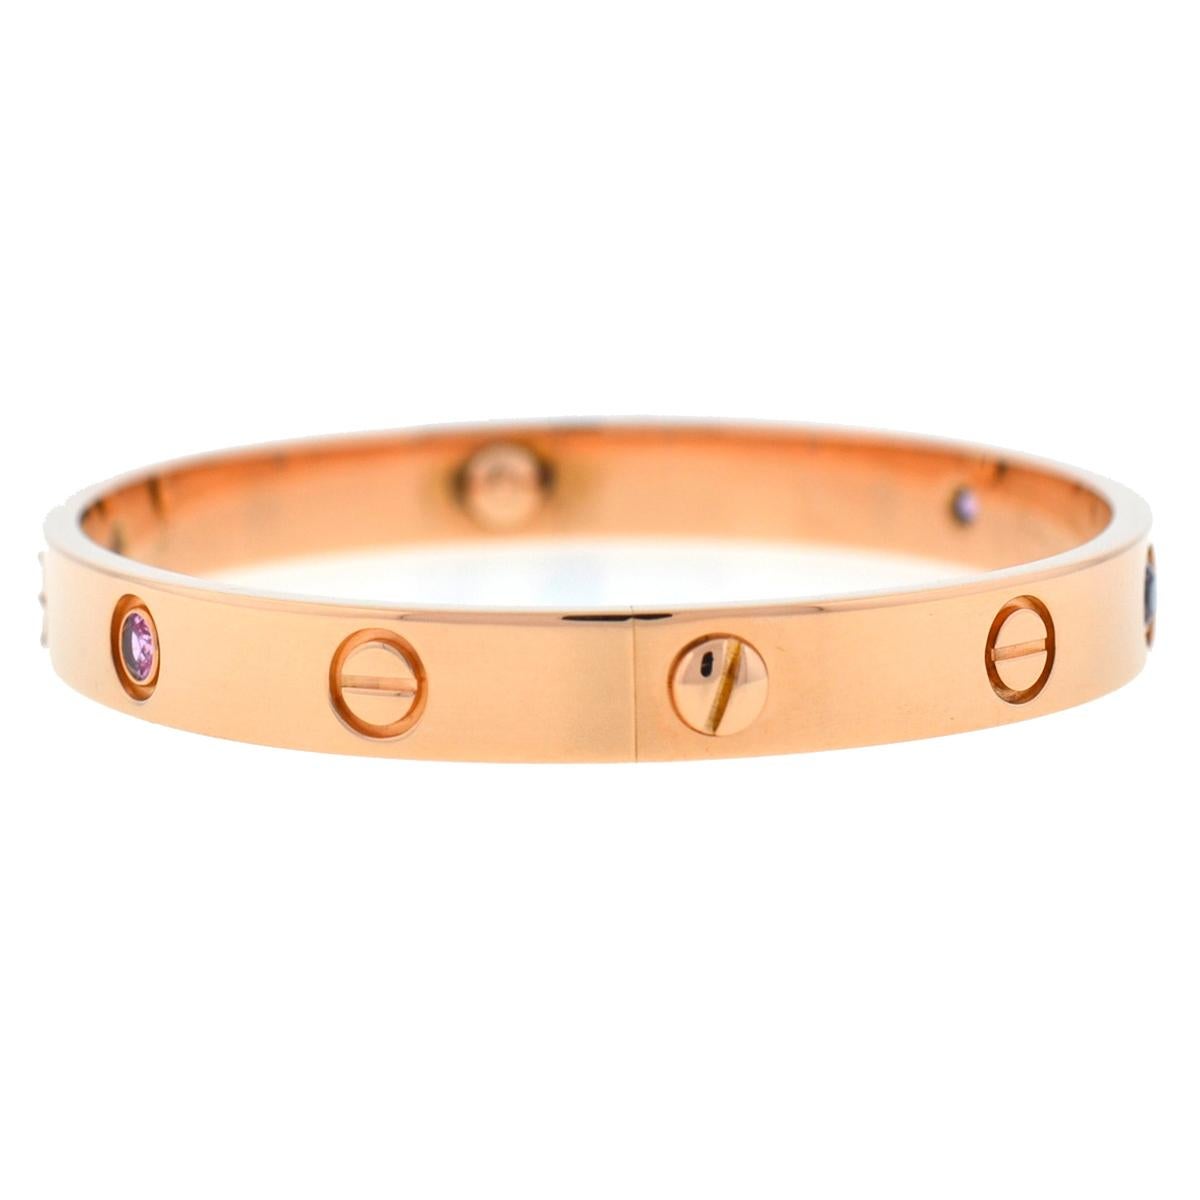 Company-Cartier
GUARANTEED 100% AUTHENTIC
Style-Cartier Pink Sapphire LOVE Bracelet Size 17 OLD STYLE
Metal-18k Rose Gold
Size -17
Includes-Bracelet ONLY
DOES NOT INCLUDE - CERTIFICATE , SCREWDRIVER OR BOX
SKU-9345-1UMEE